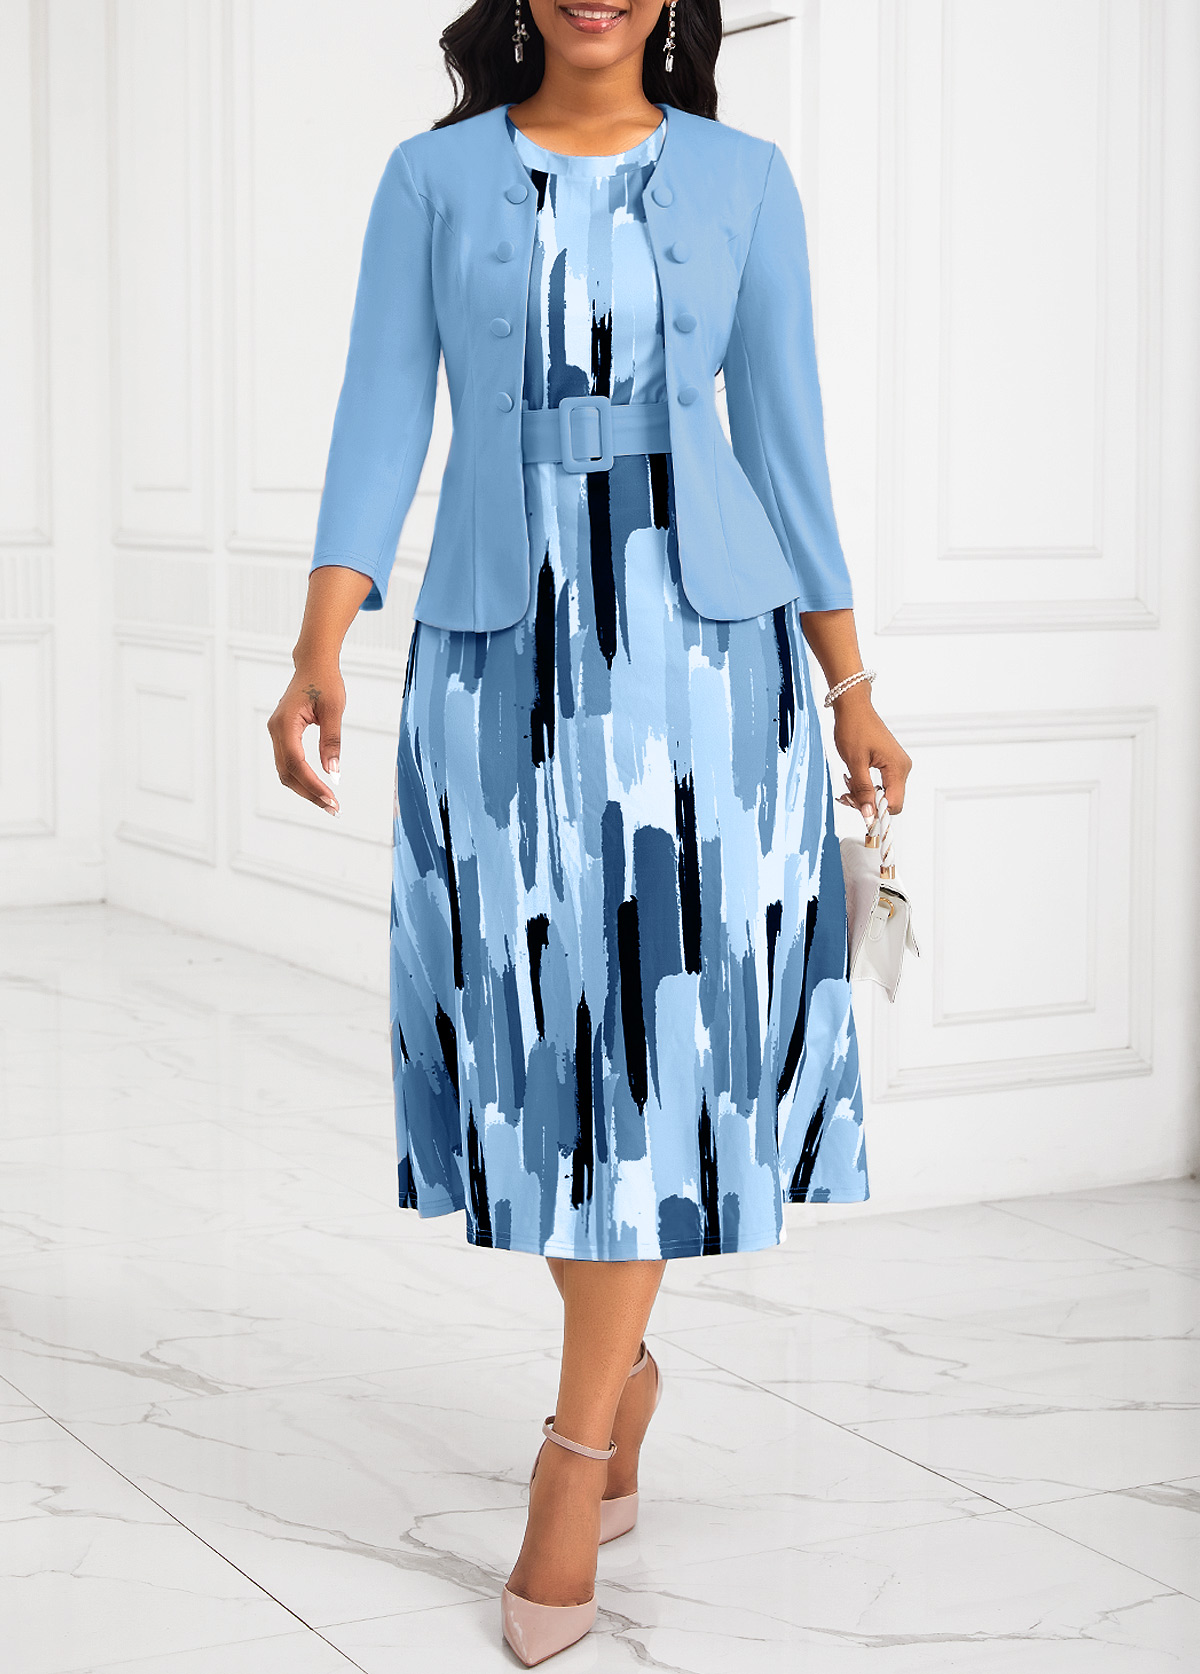 ROTITA Two Piece Light Blue Belted Round Neck Dress and Cardigan